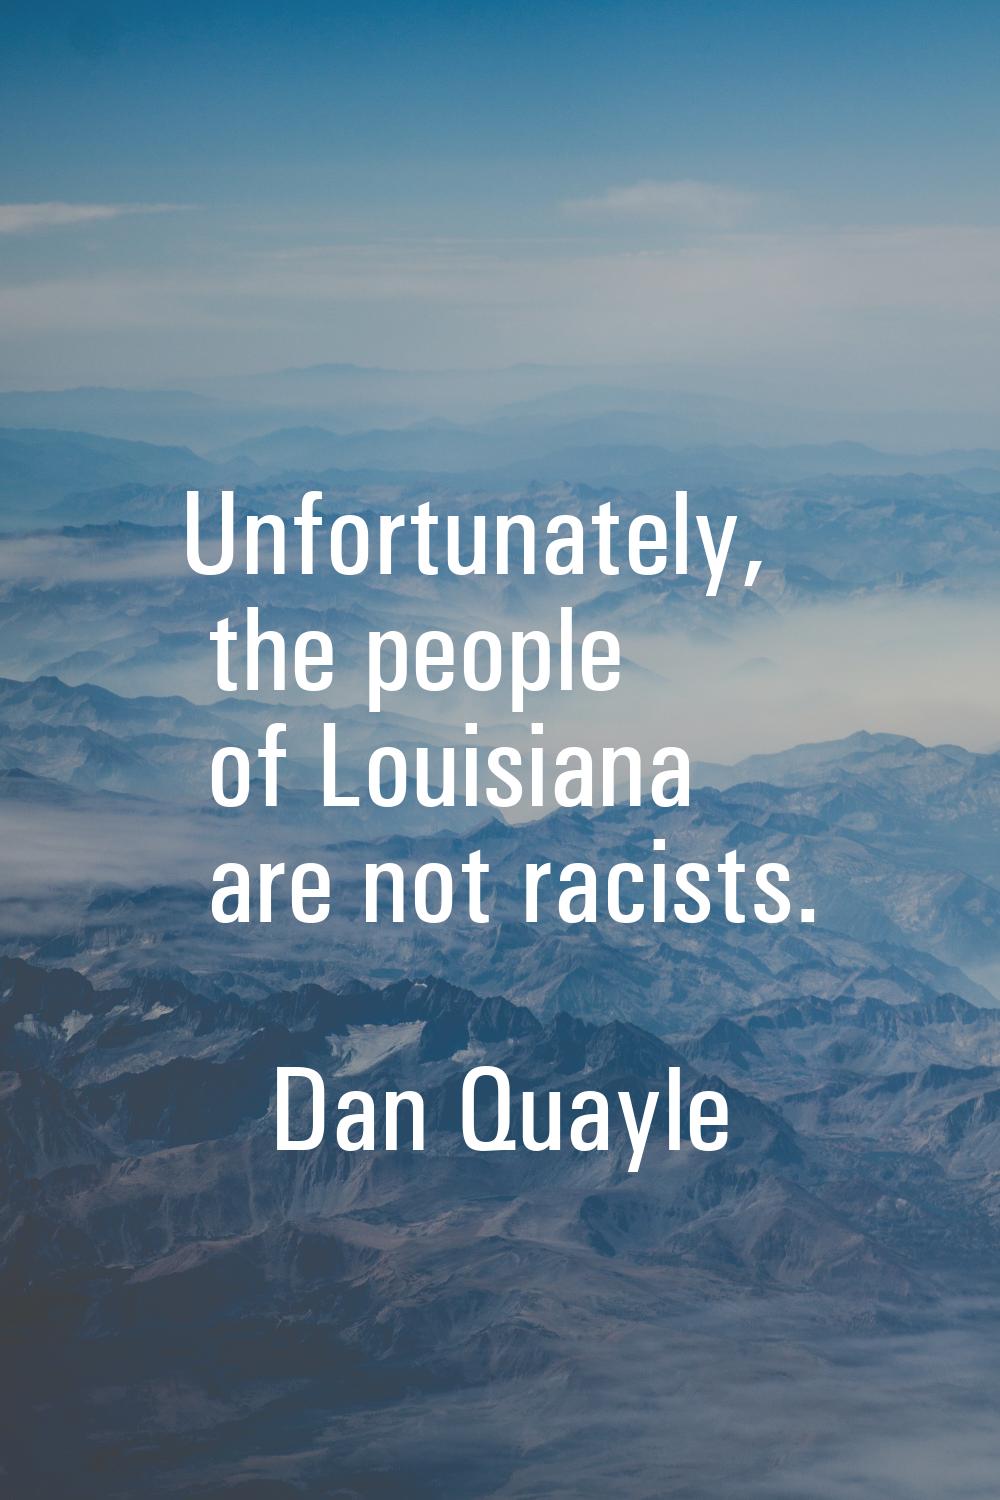 Unfortunately, the people of Louisiana are not racists.